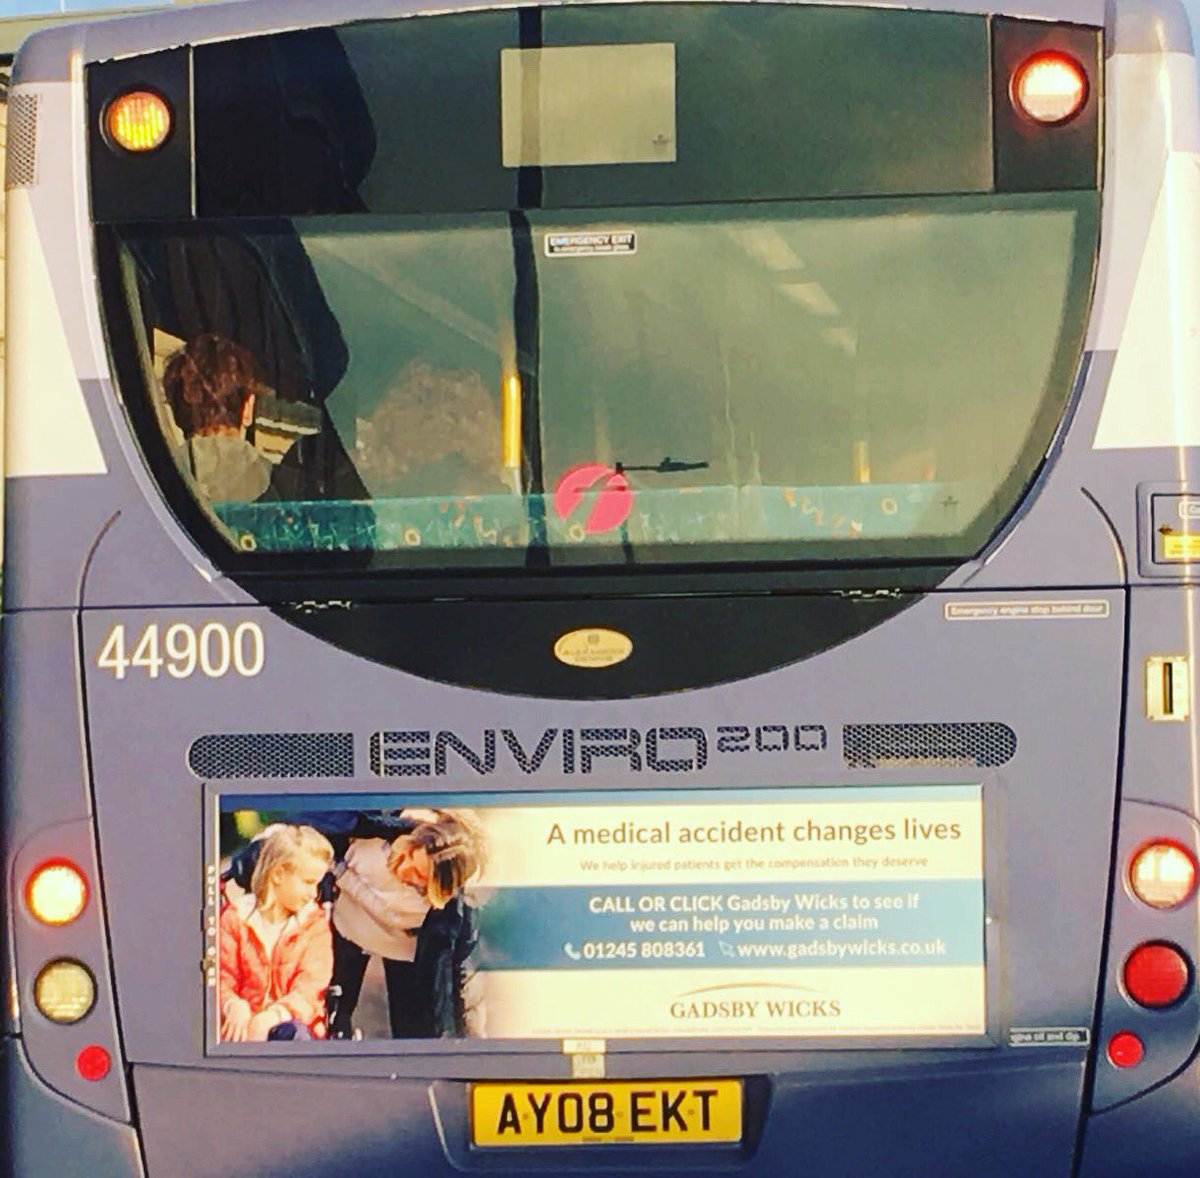 @HopeForHollyG has been spotted this morning!!! Campaign for @GadsbyWicks #modelswithdisabilities #childmodel #wheelchairmodel #hollygreenhow 🚌⭐️♿️
*
*
*
@ZebedeeMan @koala_tv @LouiseHubball @MikeLiggins @ClaireMcGlasson @chrismannbbc @ElodieITV